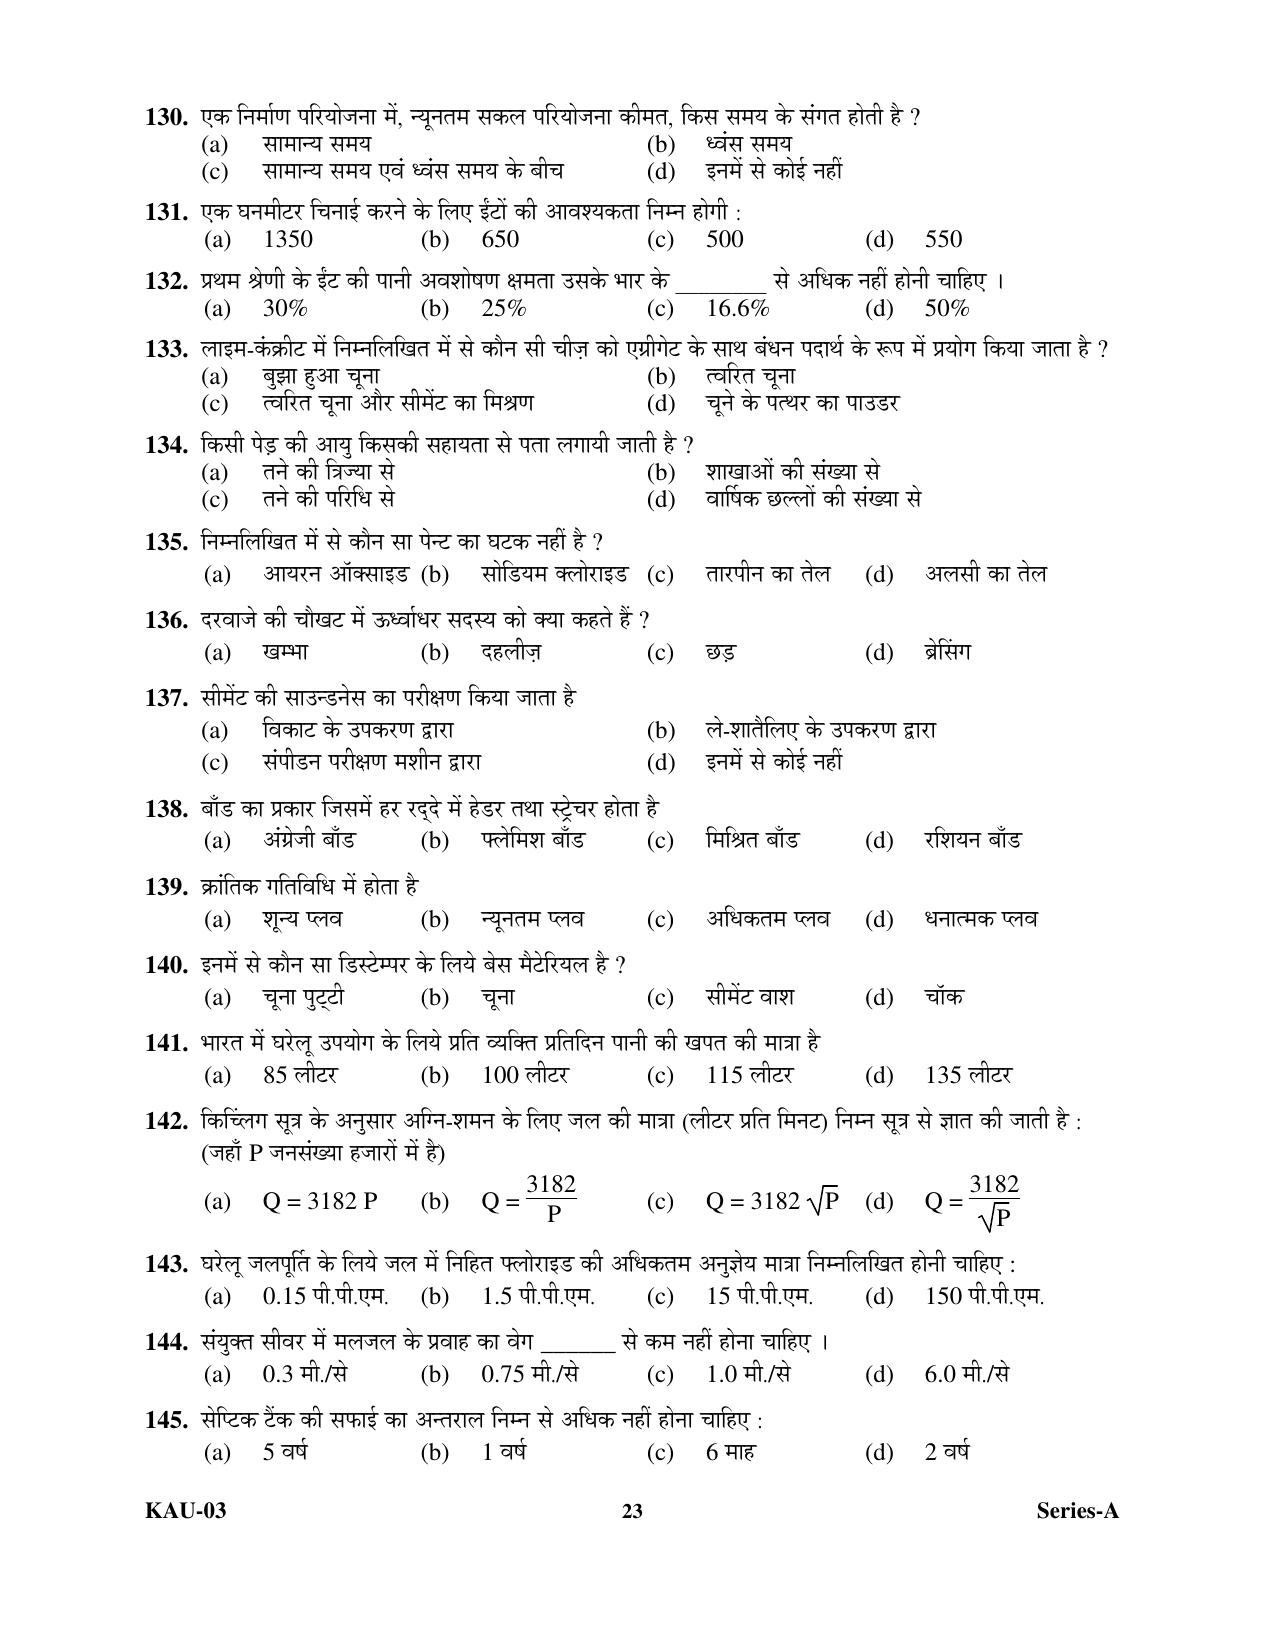 SEBI Officer Civil Engineering Previous Paper - Page 22